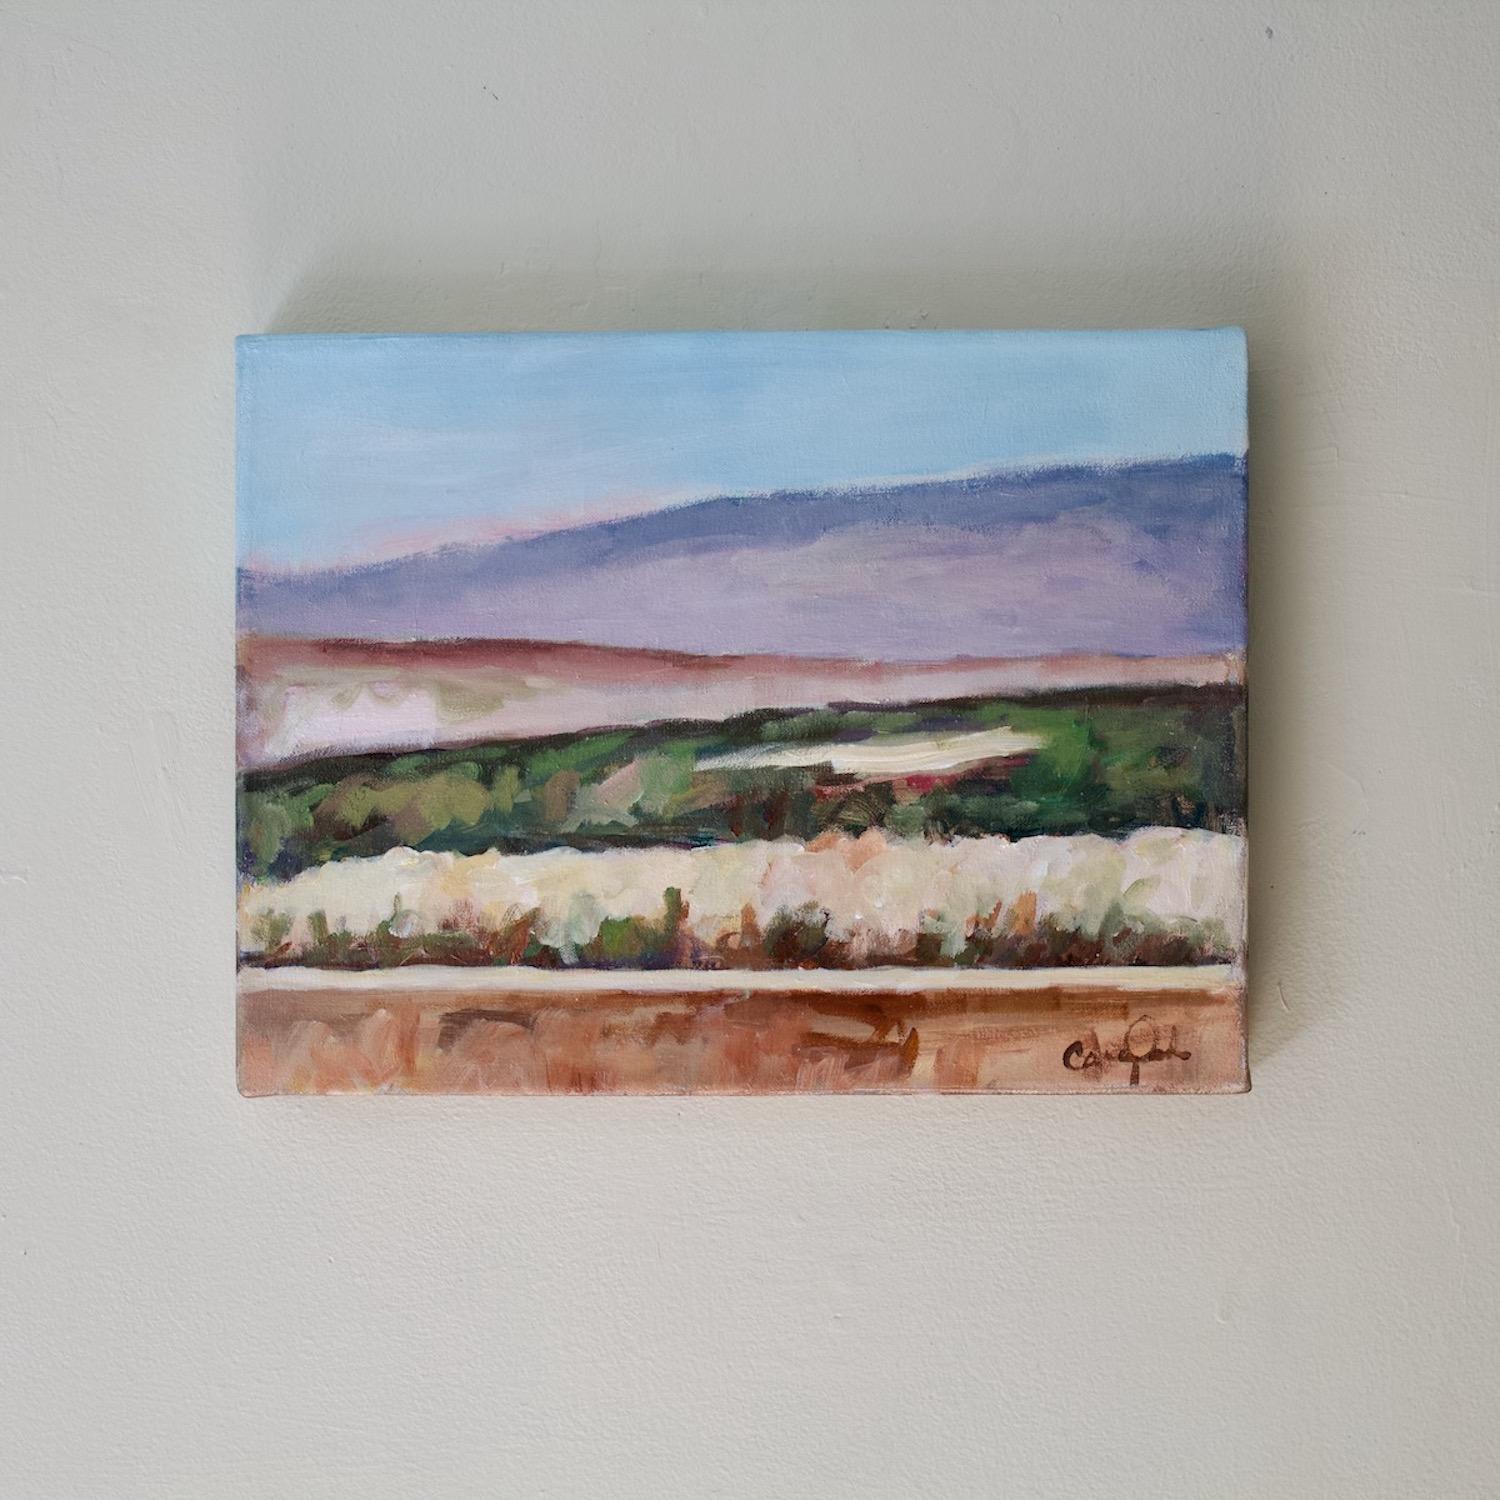 <p>Artist Comments<br>Artist Carey Parks paints a modernist take on the mountains of Sugarbush in the late summer. Inspired by her family's frequent visits to Vermont, Carey shows the open panoramic views of the Mad River Valley. Here she captures